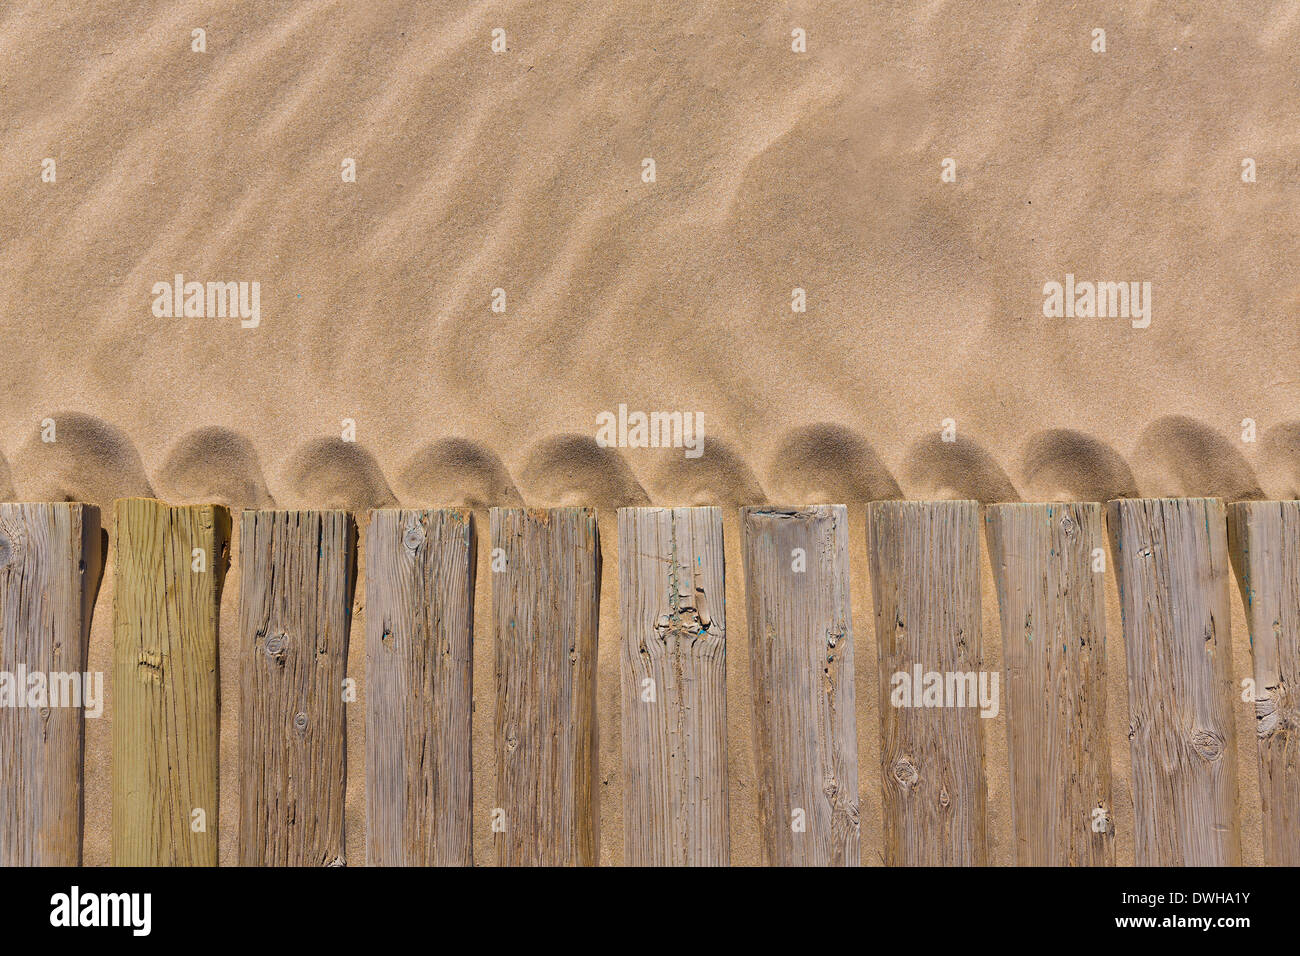 pine wood deck weathered in beach sand pattern texture detail Stock Photo